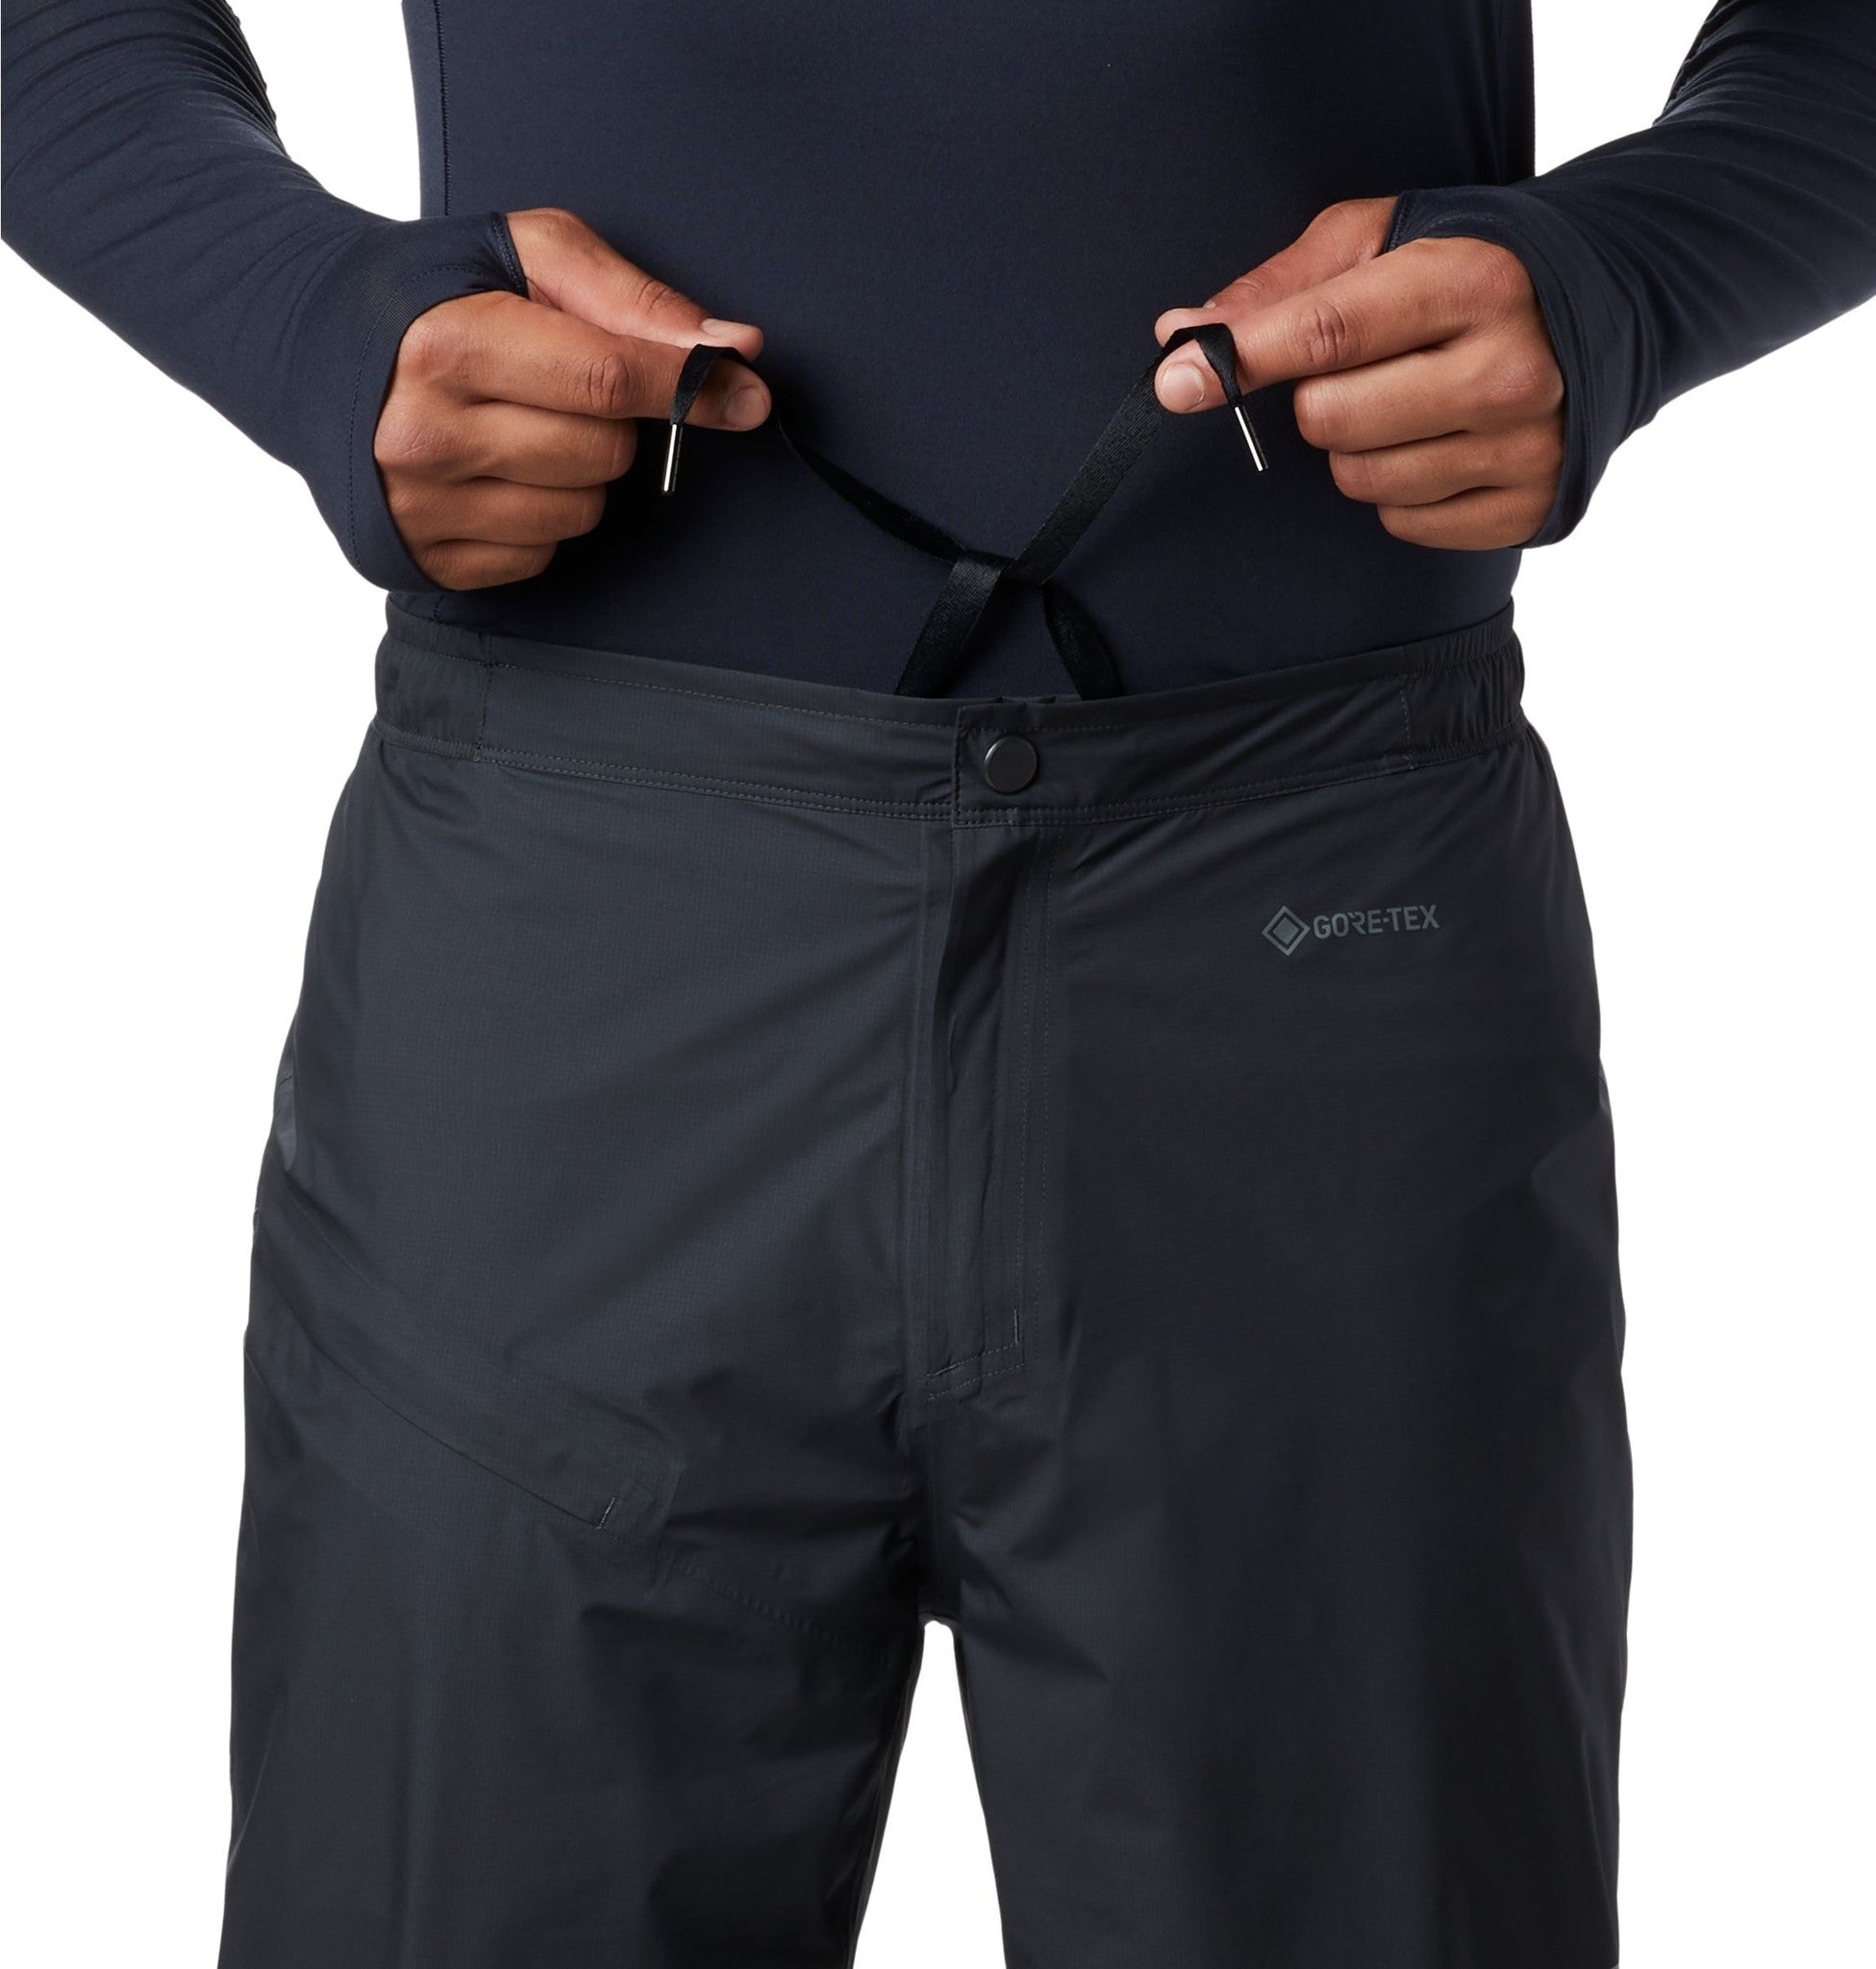 Galvin Green Alexandra GORE-TEX Paclite Waterproof Golf Trousers 2018 |  Trousers & Shorts at JamGolf